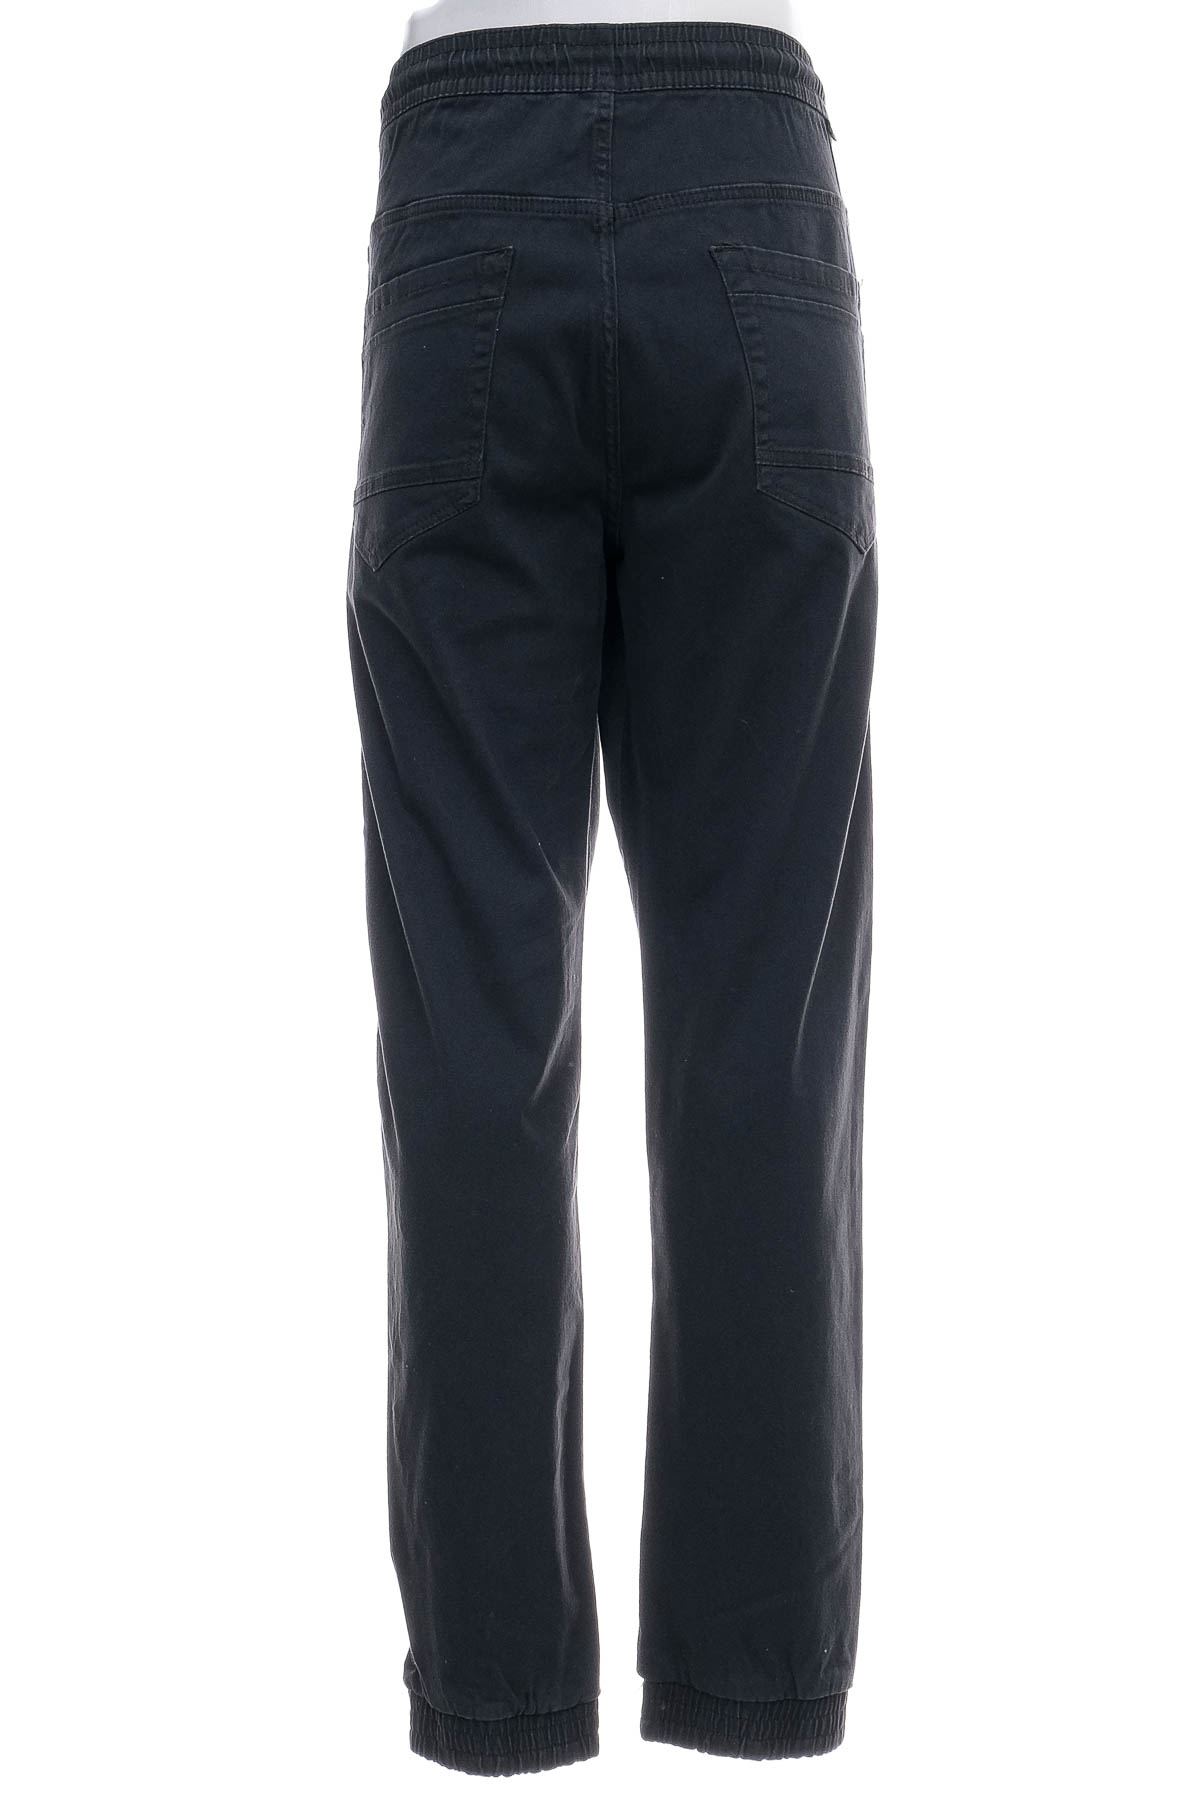 Men's trousers - HOUSE BRAND - 1